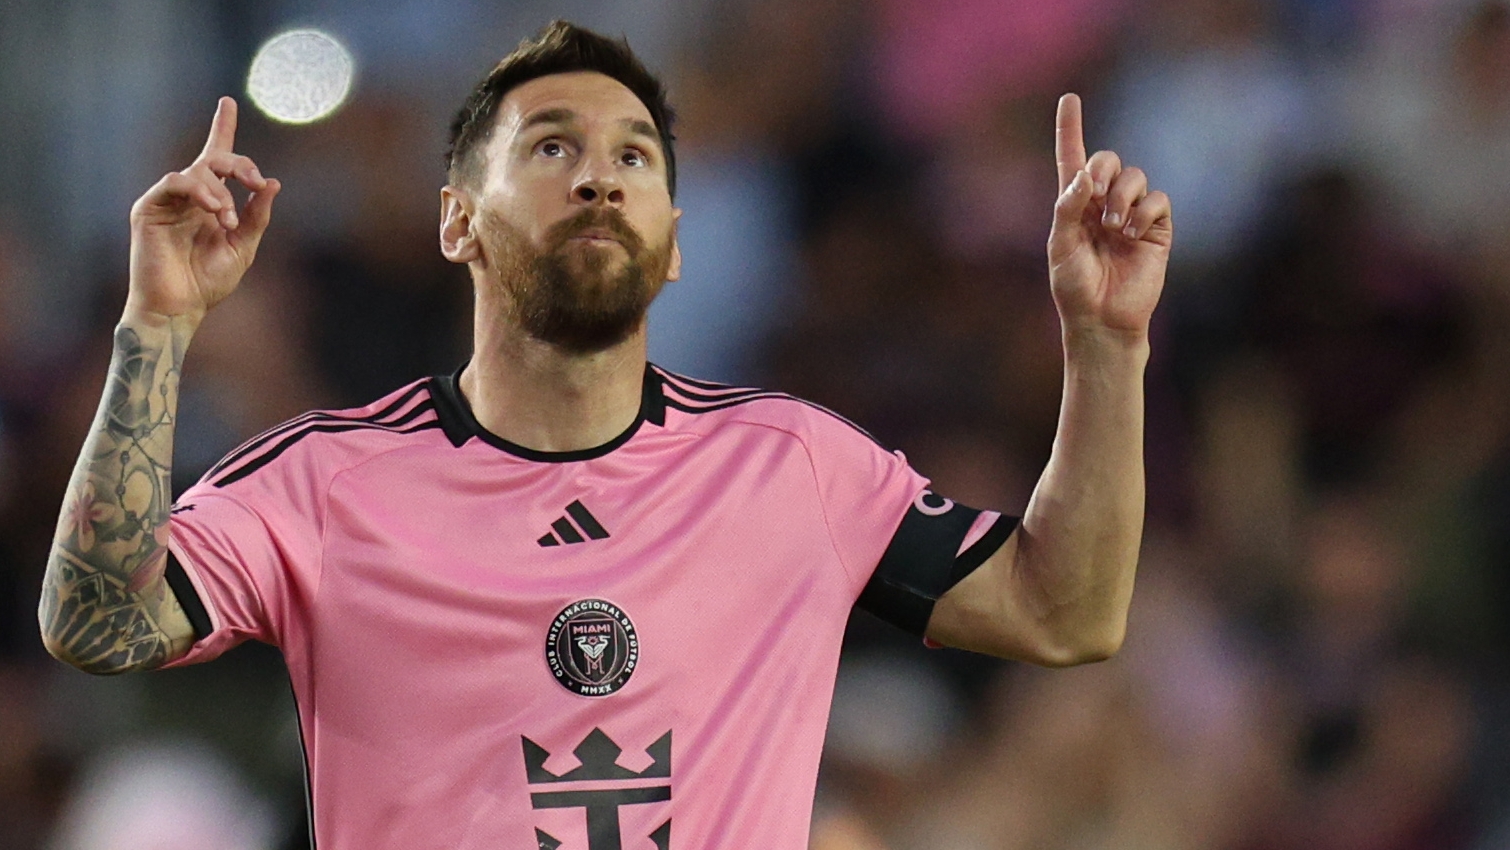 Messi equalizes from close range for Inter Miami